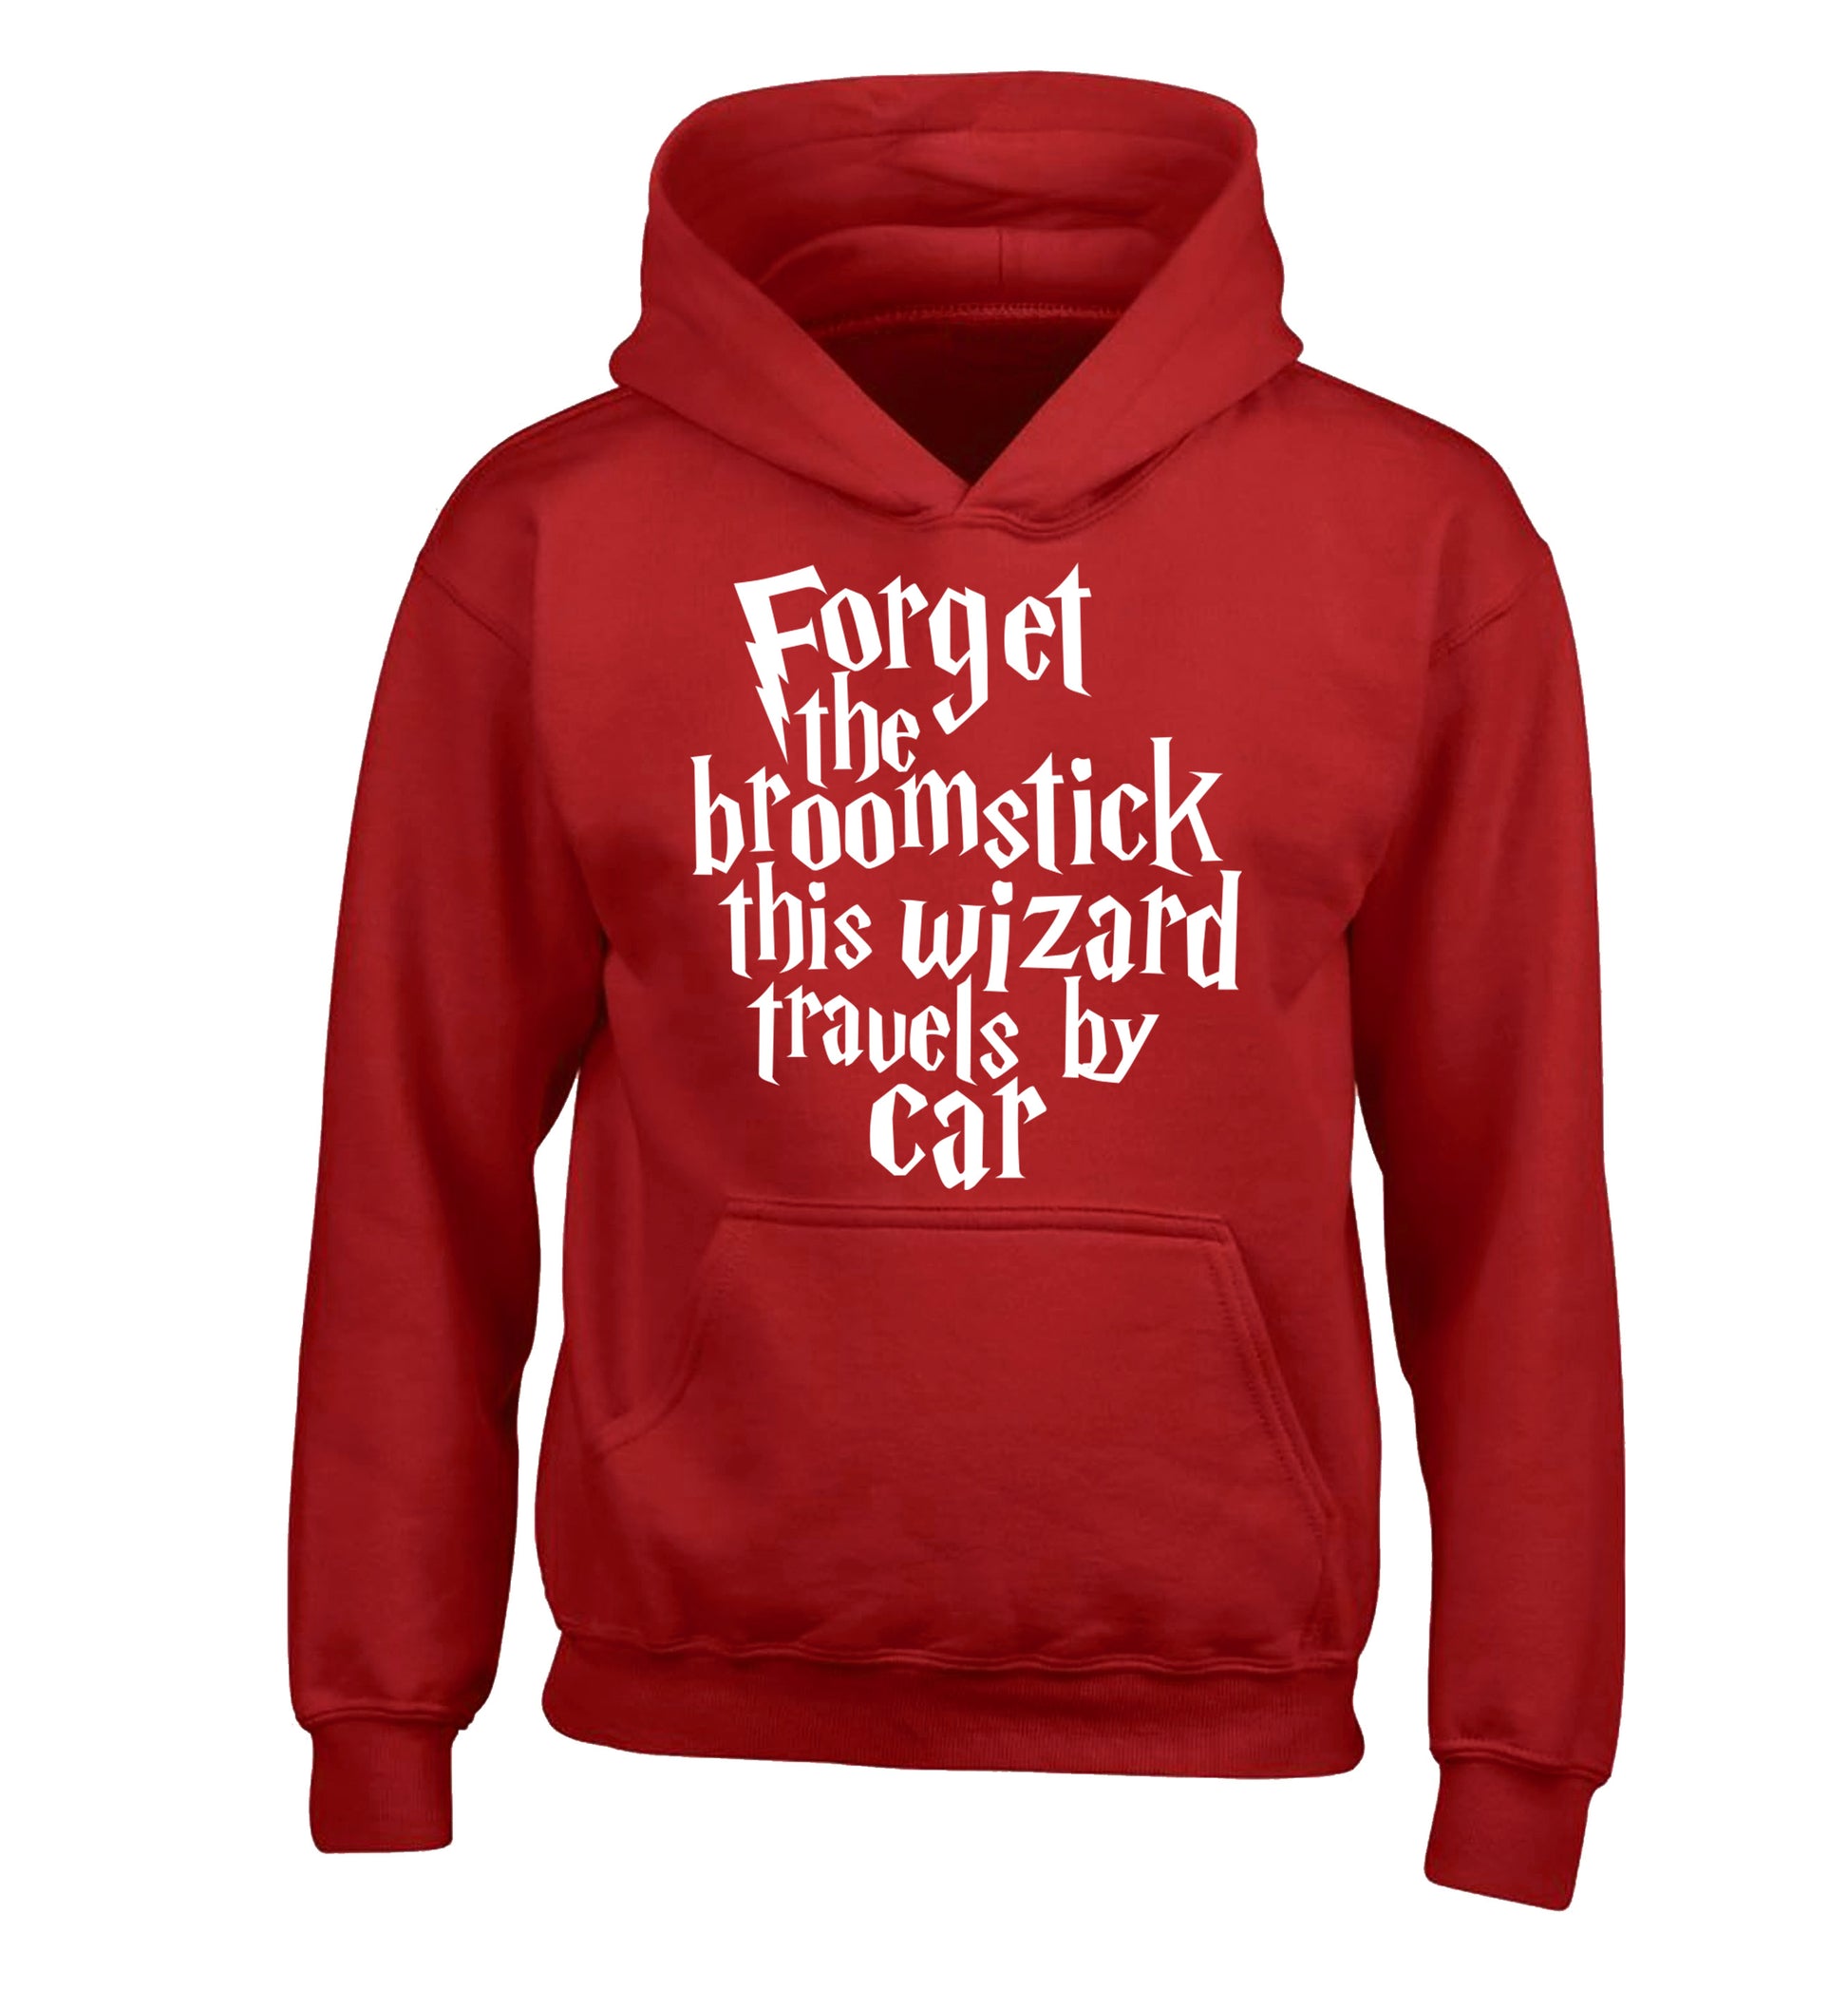 Forget the broomstick this wizard travels by car children's red hoodie 12-14 Years